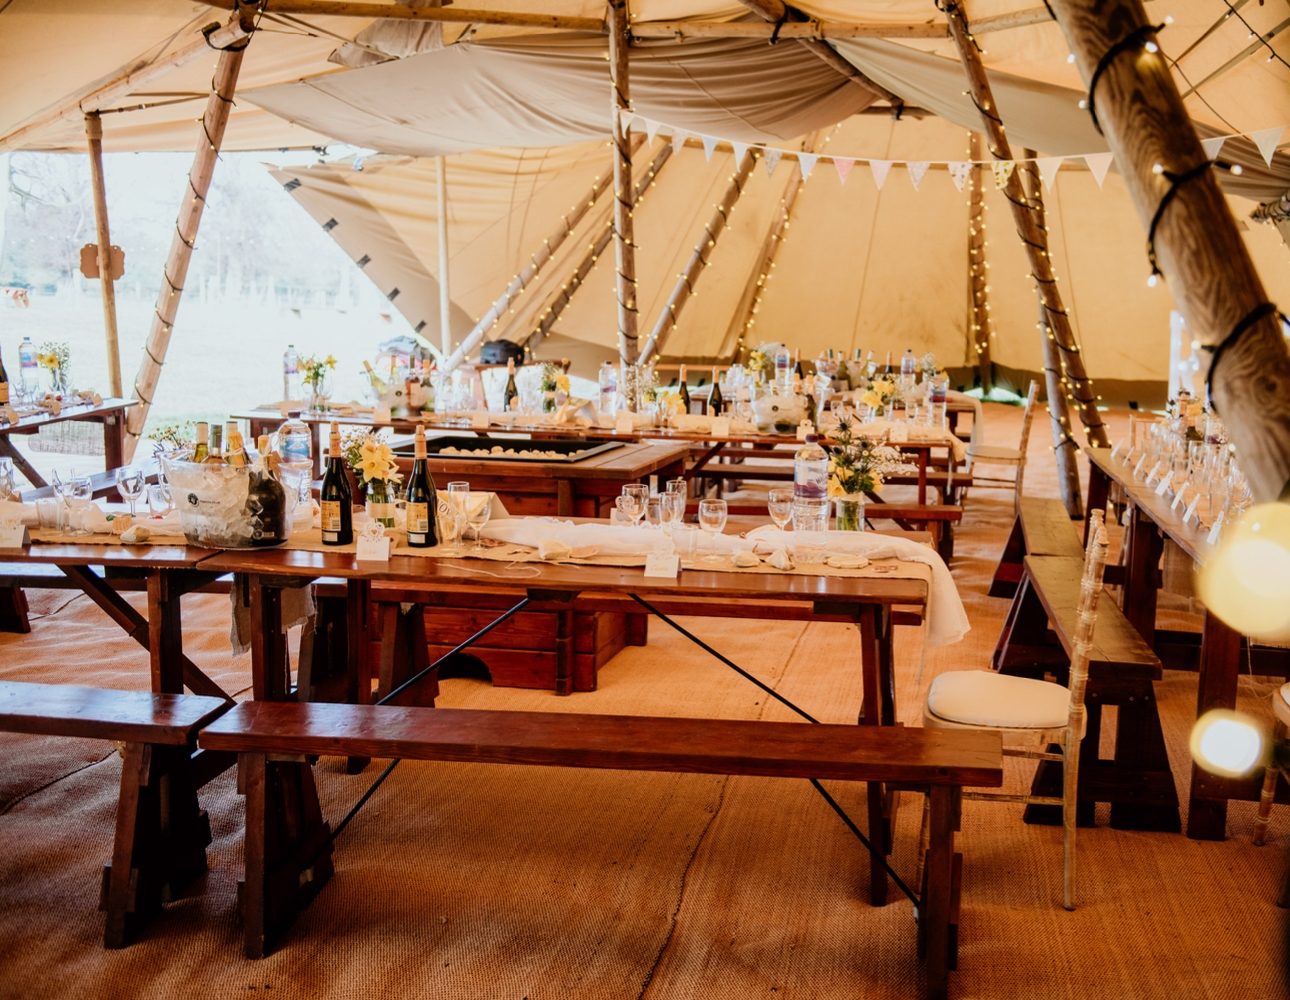 Interior of a tipi to hire from Fireflower Tipis